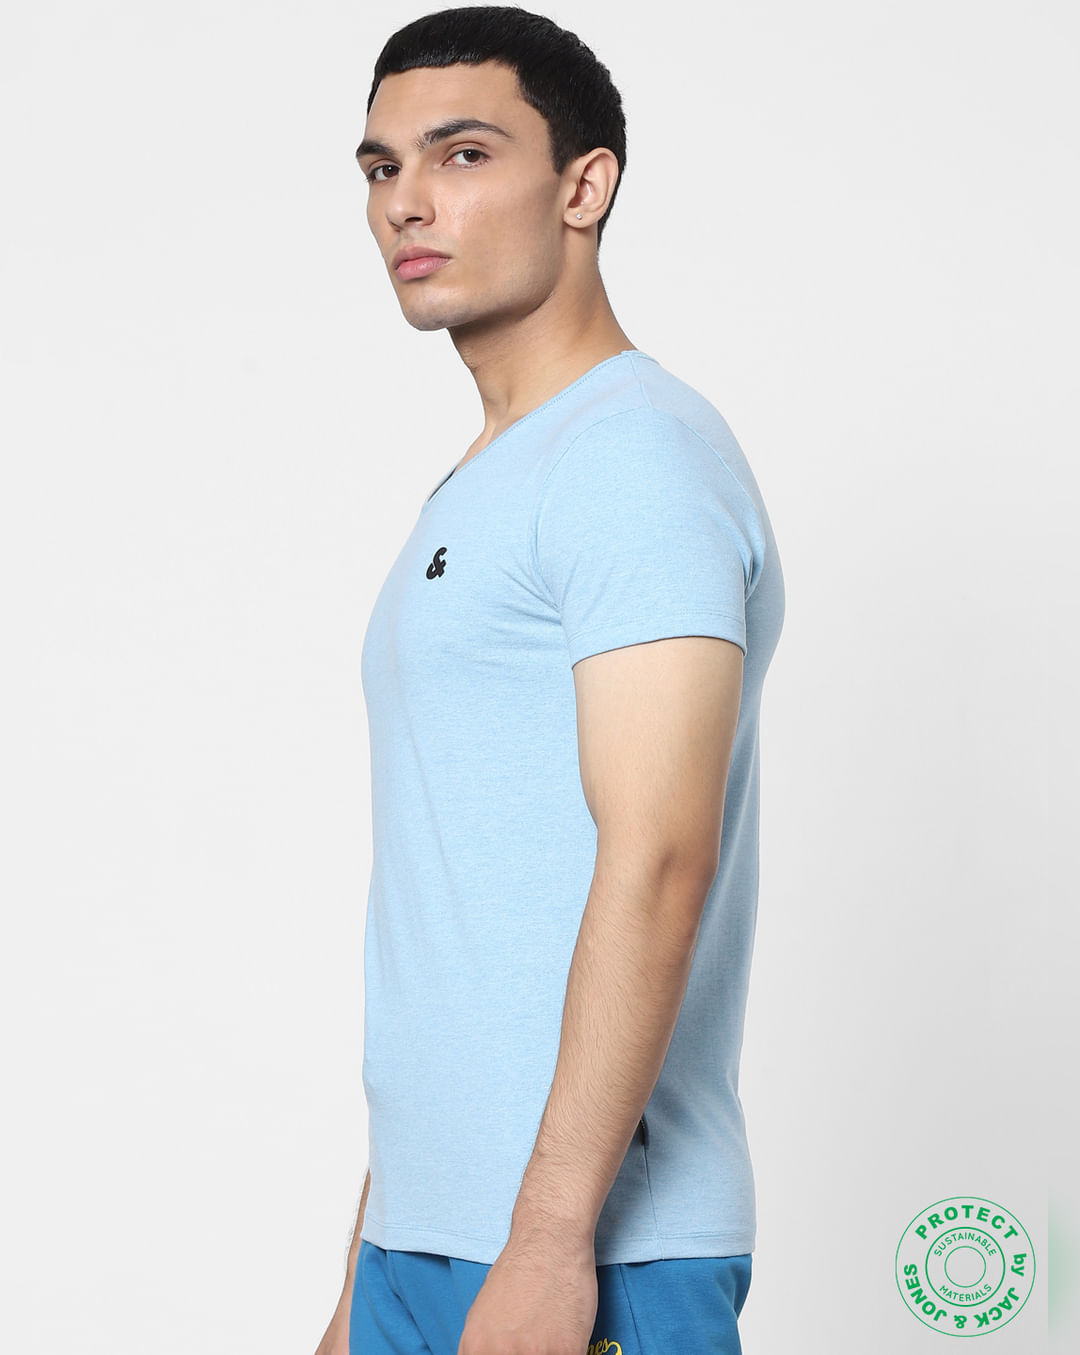 Buy White & Blue V Neck T-shirts - Pack of 2 Online in India - Flat 50% Off